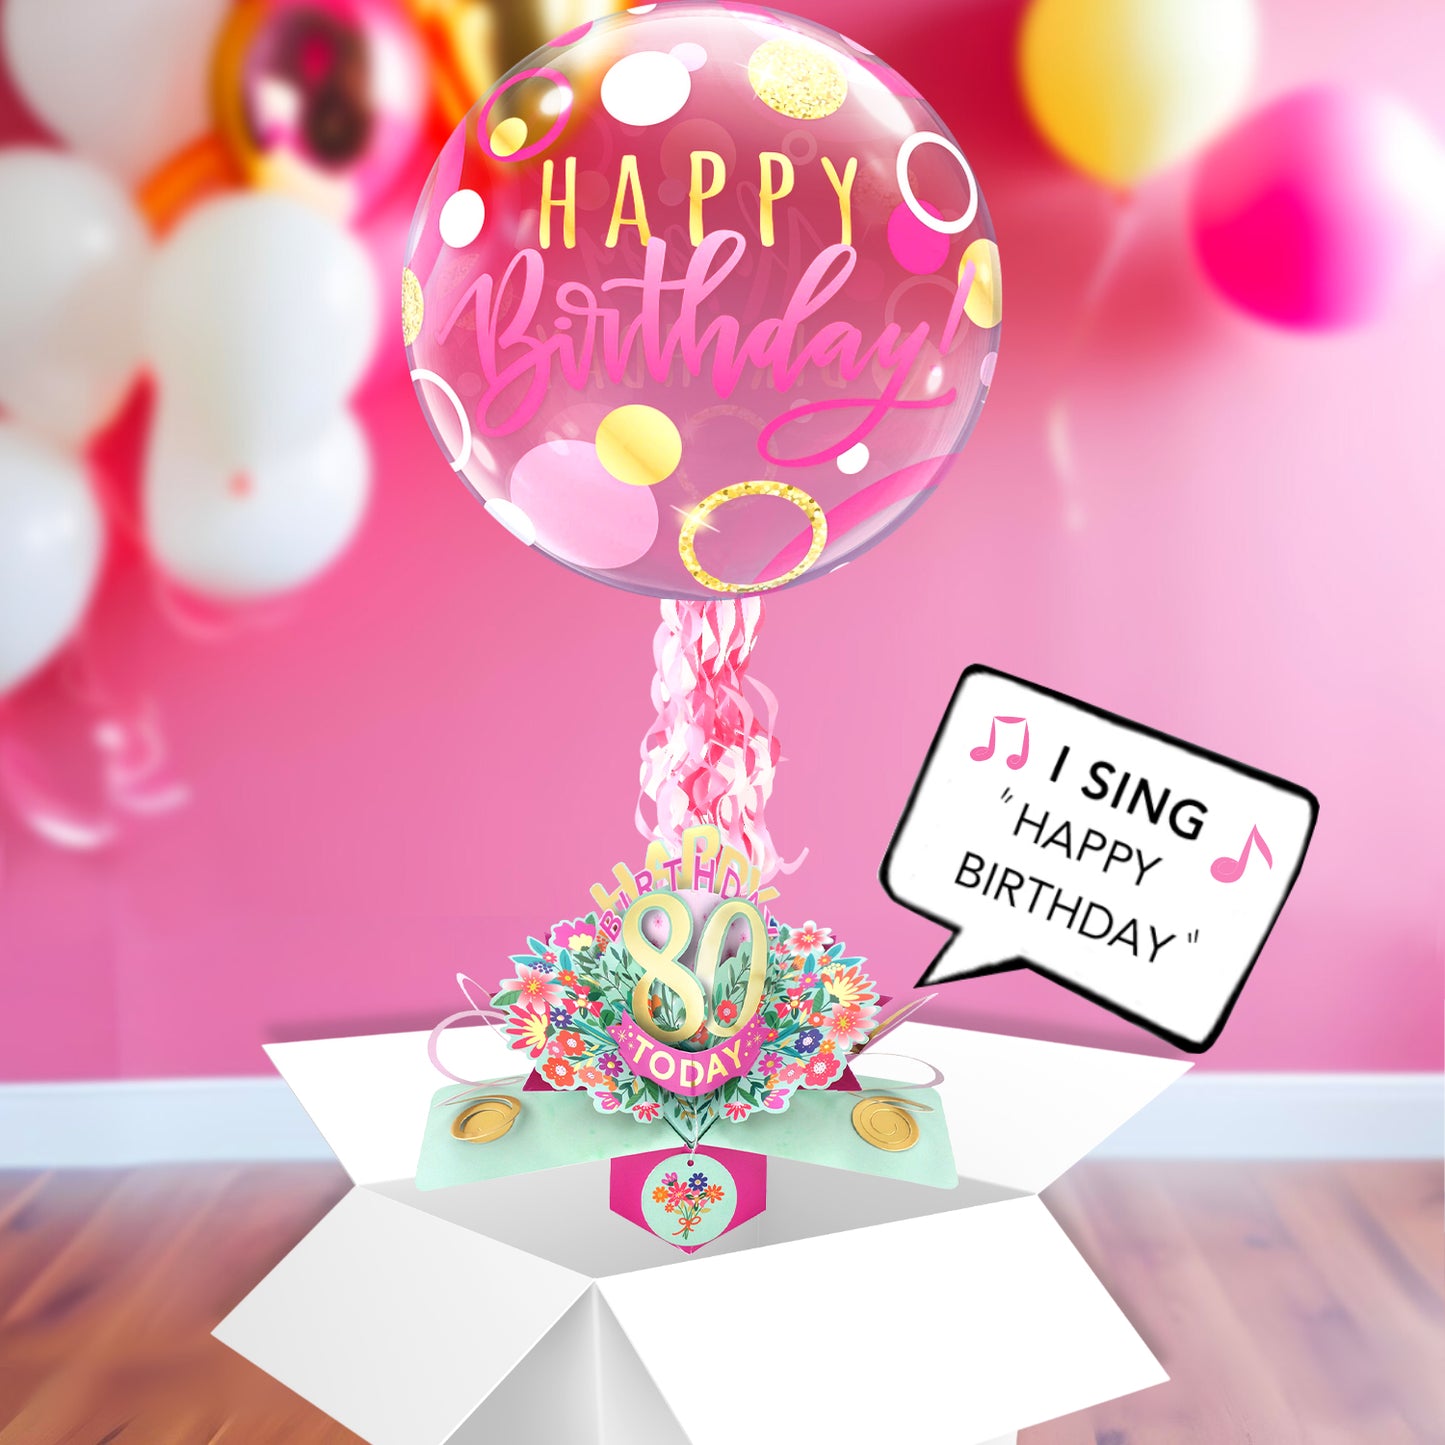 80th Birthday Pop Up Card & Musical Balloon Surprise Delivered In A Box For Her